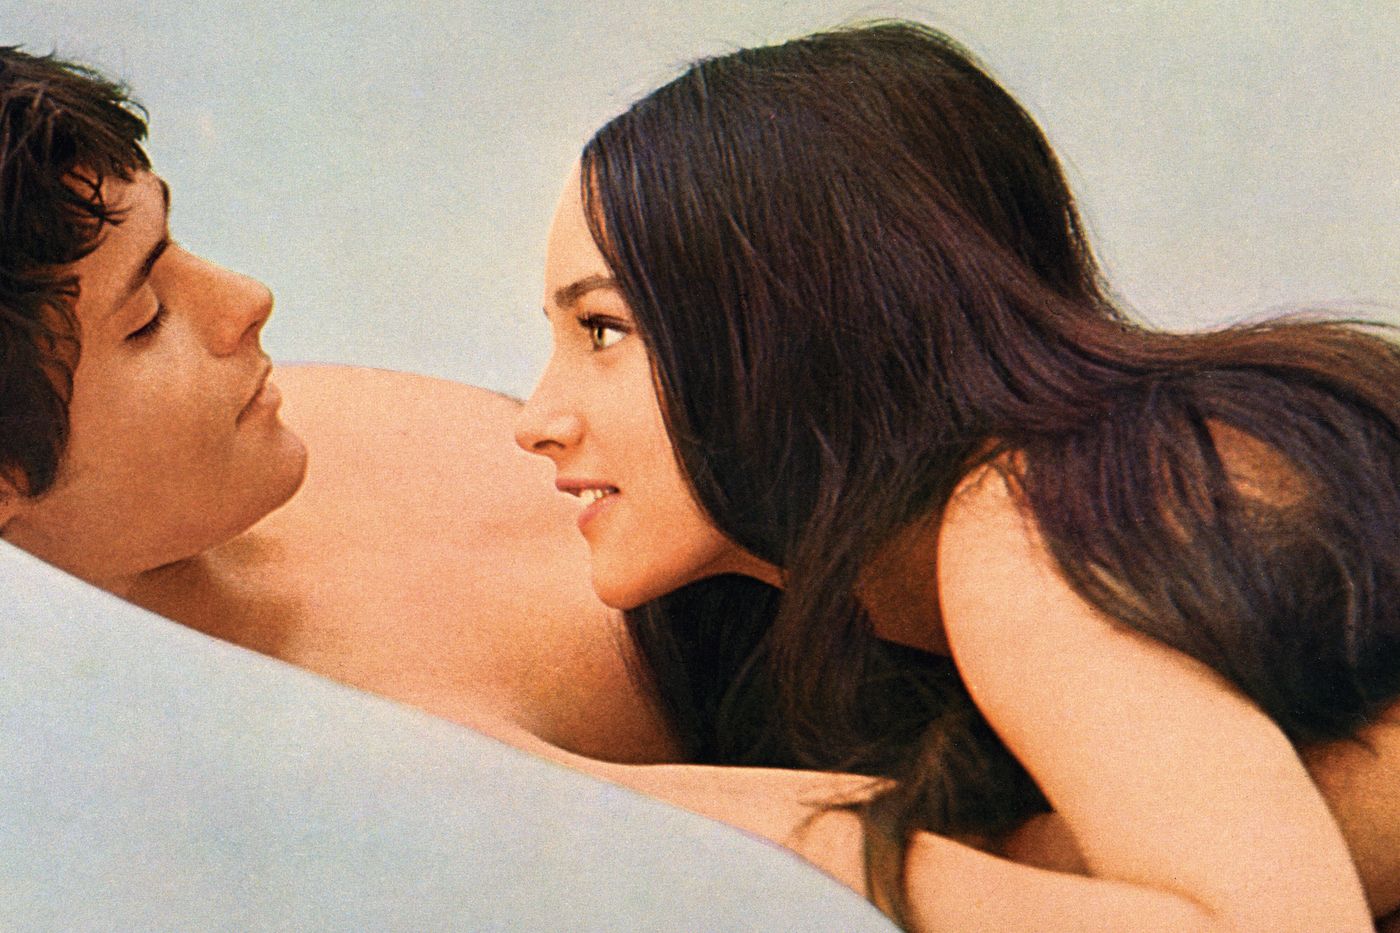 Mom And Son Forced Romantic Sex Videos In Koren - Olivia Hussey and Leonard Whiting's Romeo and Juliet Lawsuit